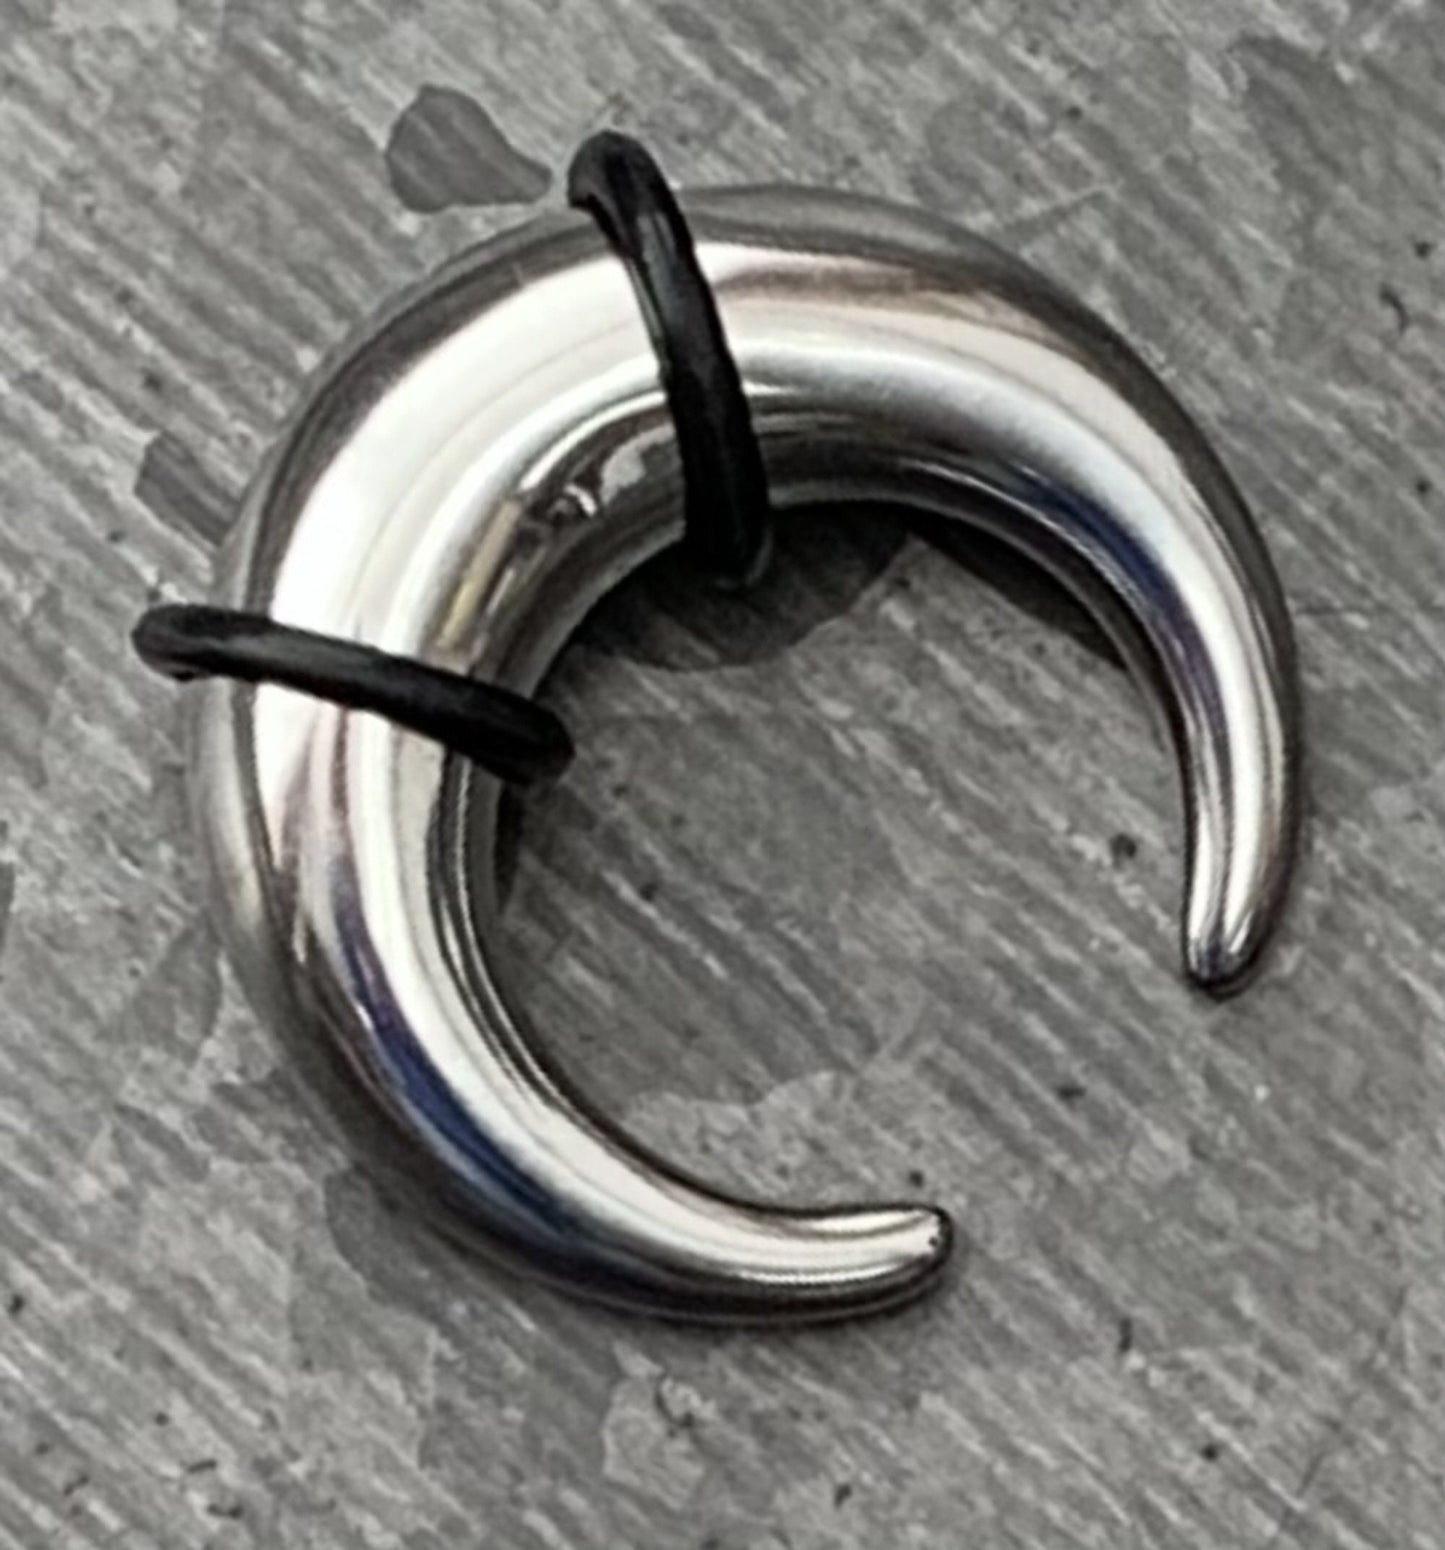 1 PIECE Solid 316L Surgical Steel Septum Ring / Buffalo Taper with O-Rings - Expander- Gauges 14g (1.6mm) thru 00g (10mm) Available!